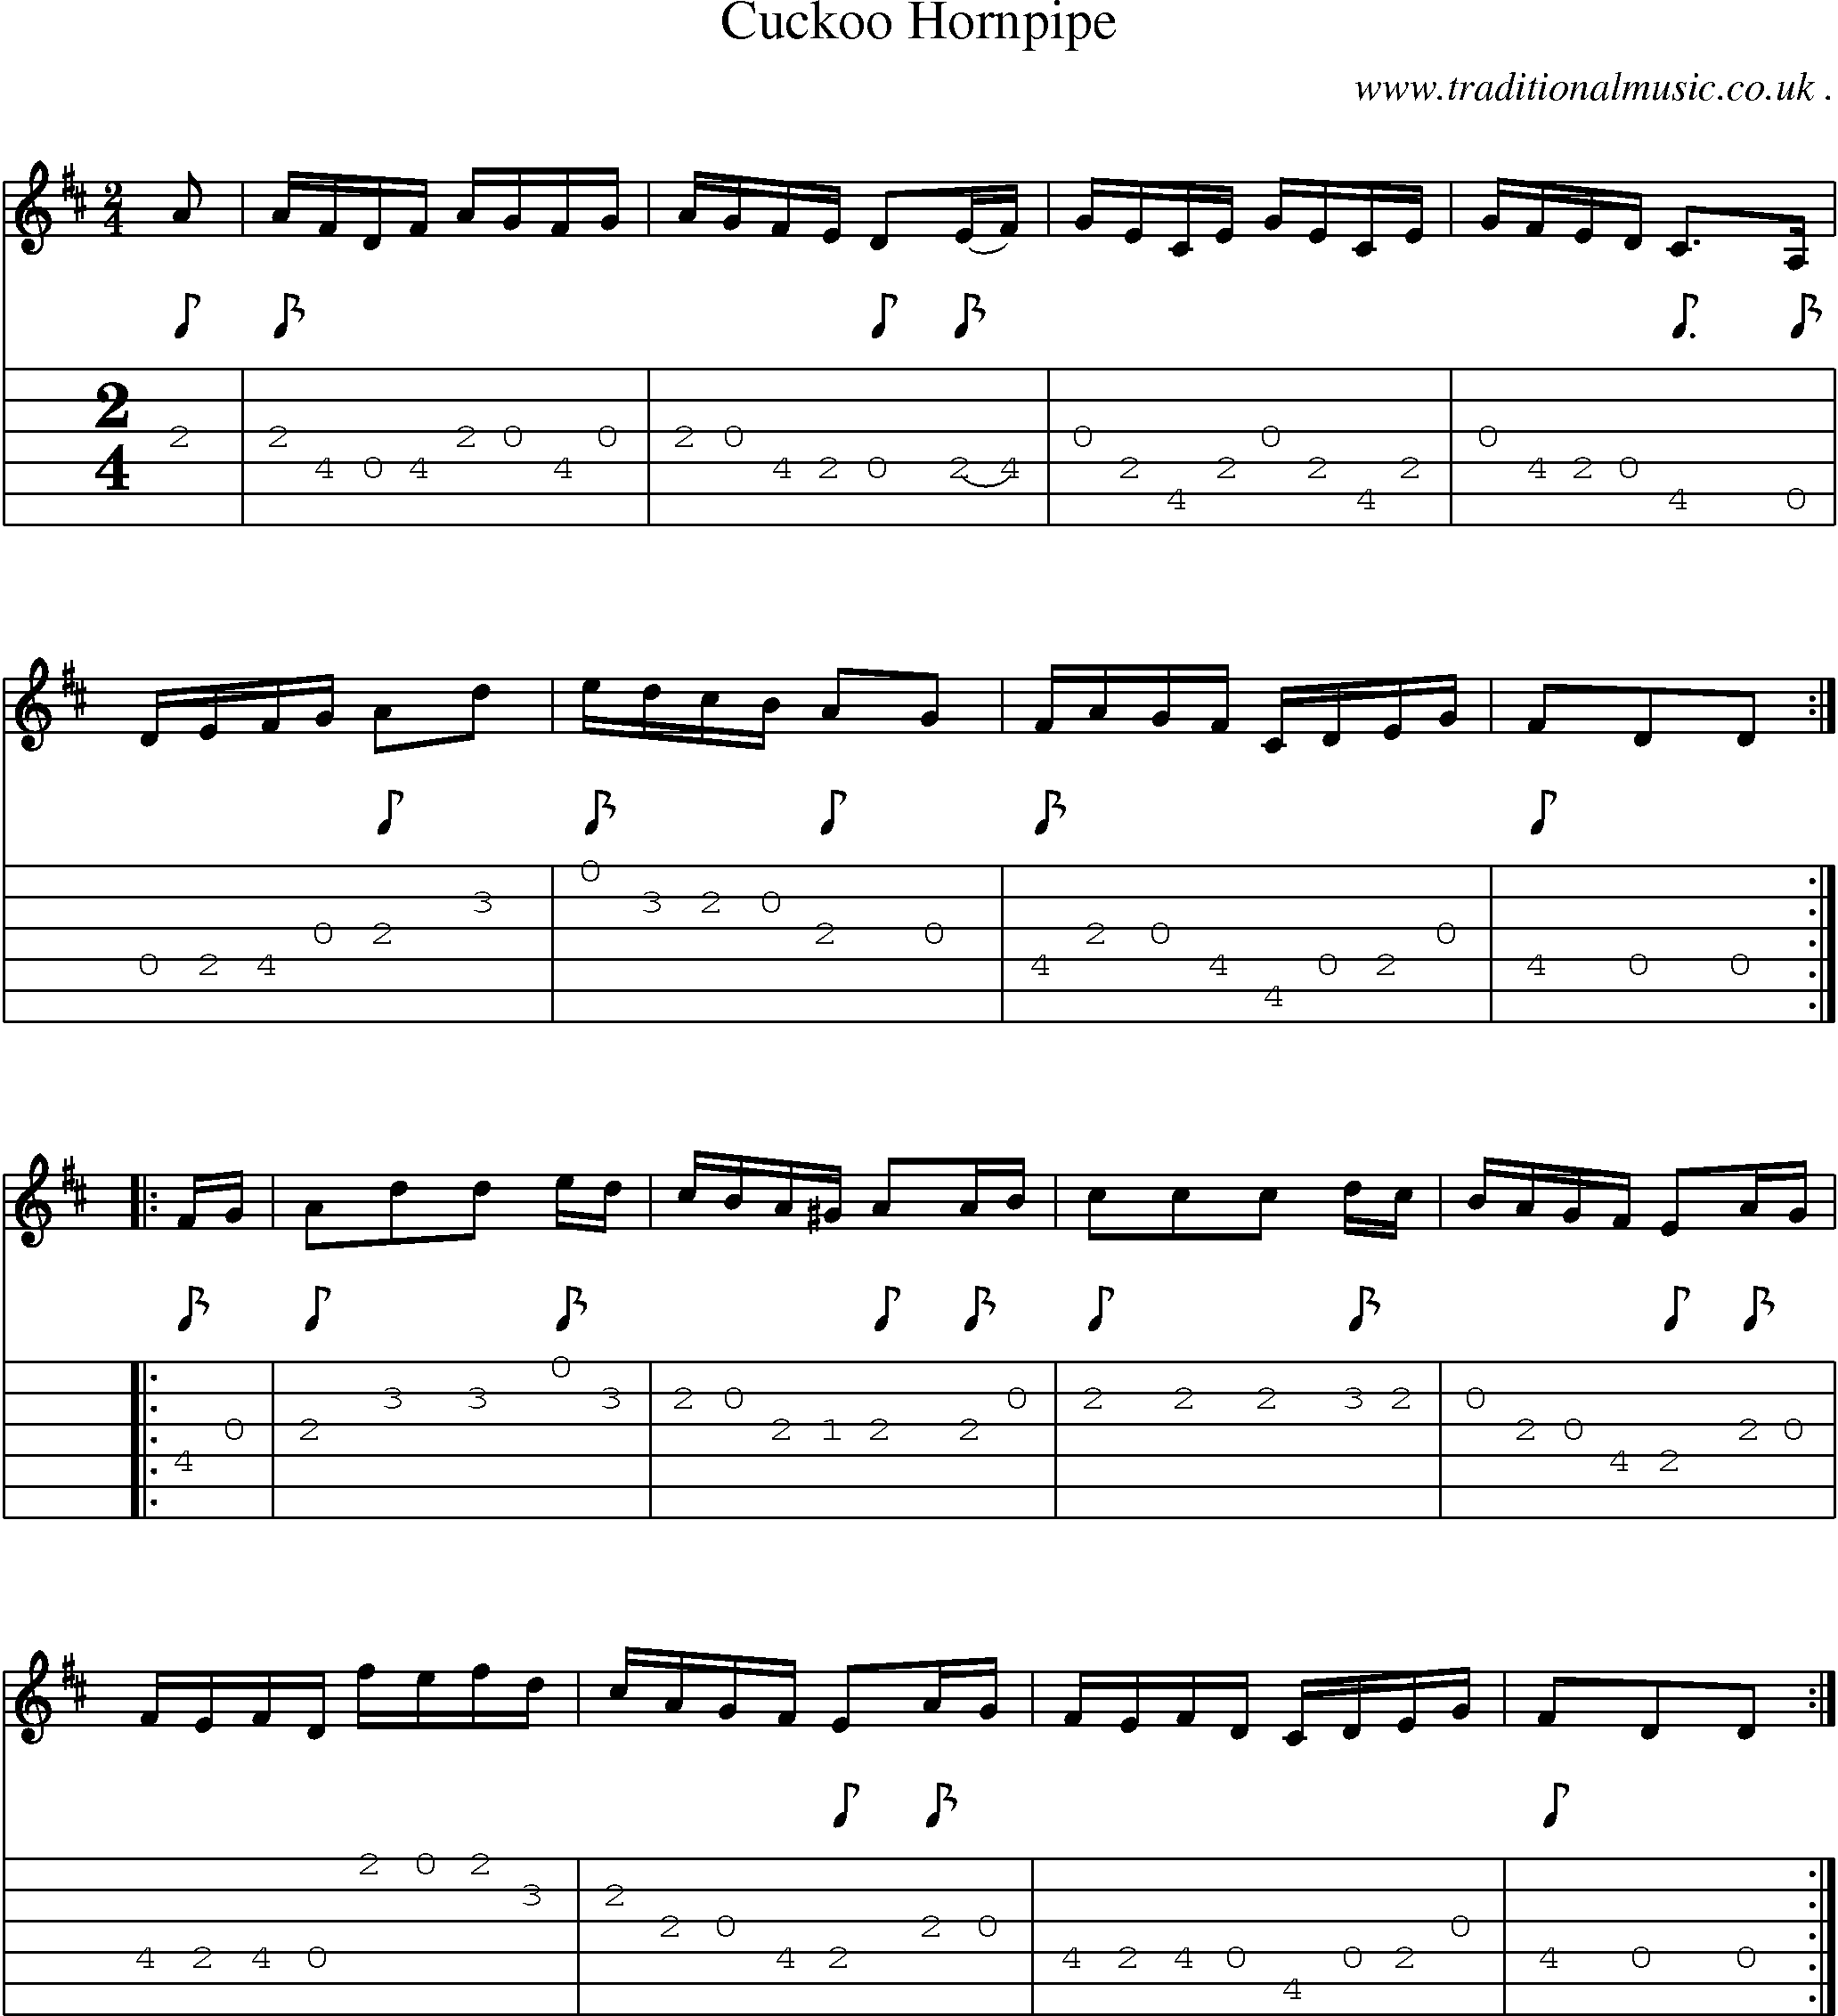 Sheet-Music and Guitar Tabs for Cuckoo Hornpipe